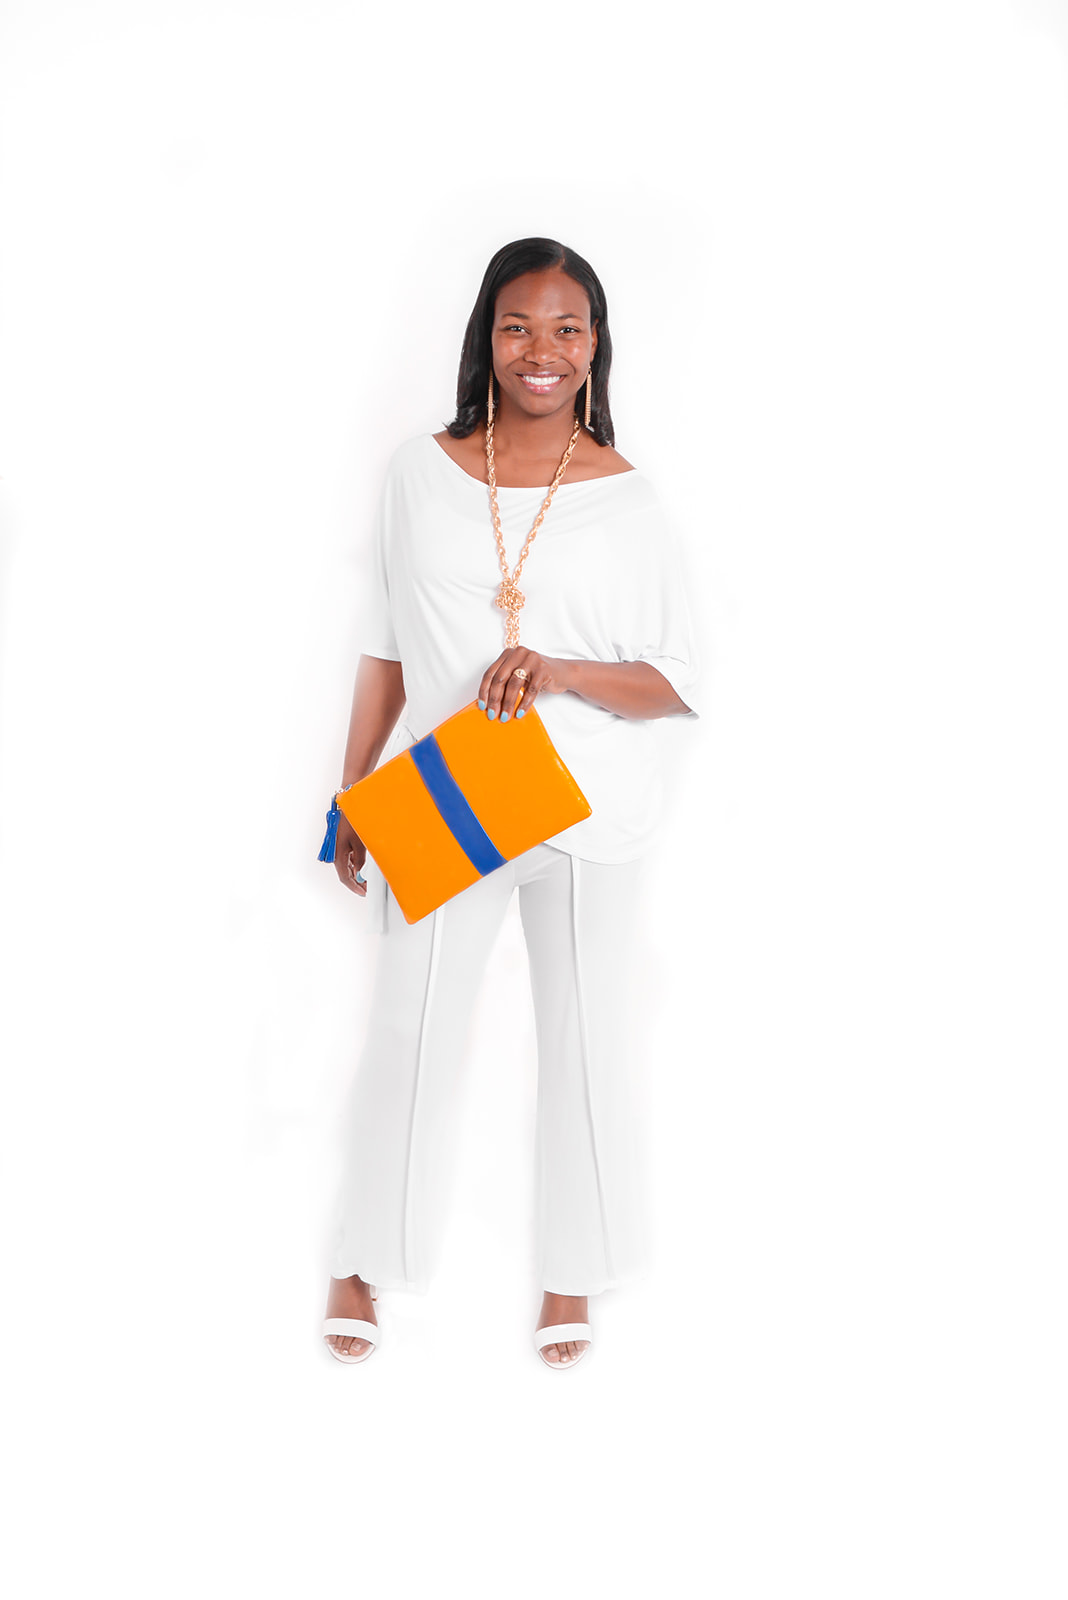 SGRho Blue and Gold Clutch.jpg